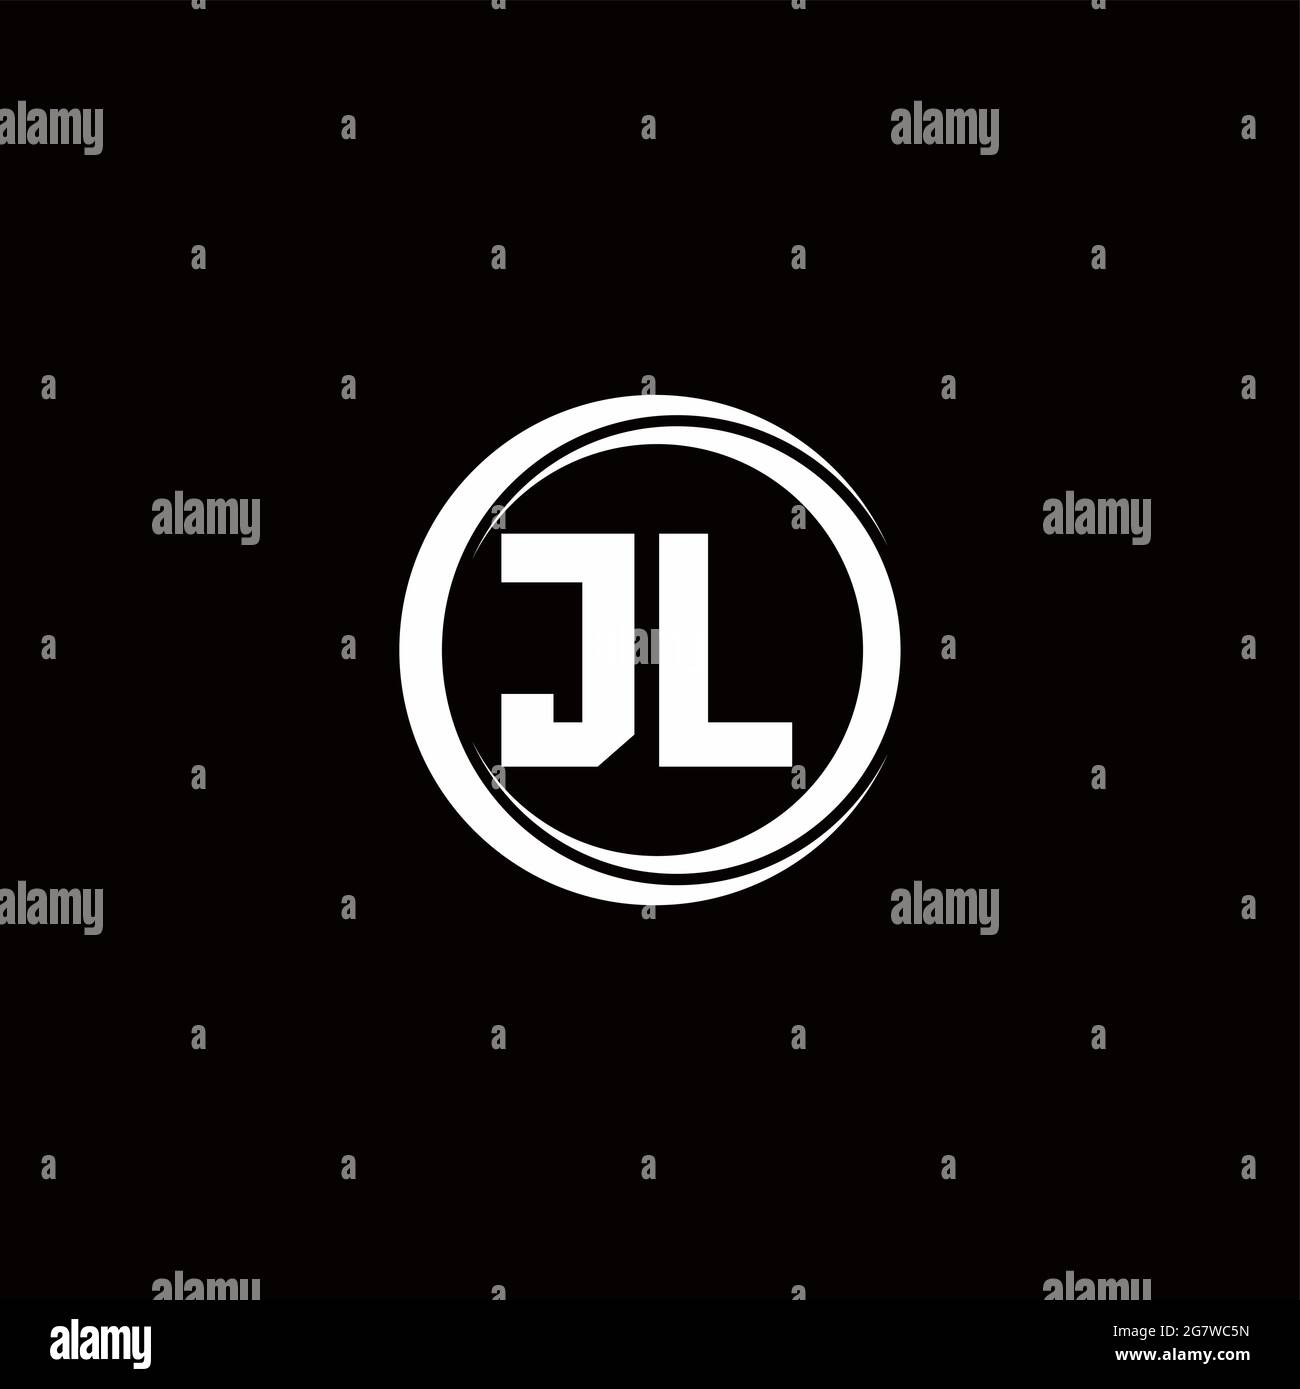 JL logo initial letter monogram with circle slice rounded design template isolated in black background Stock Vector